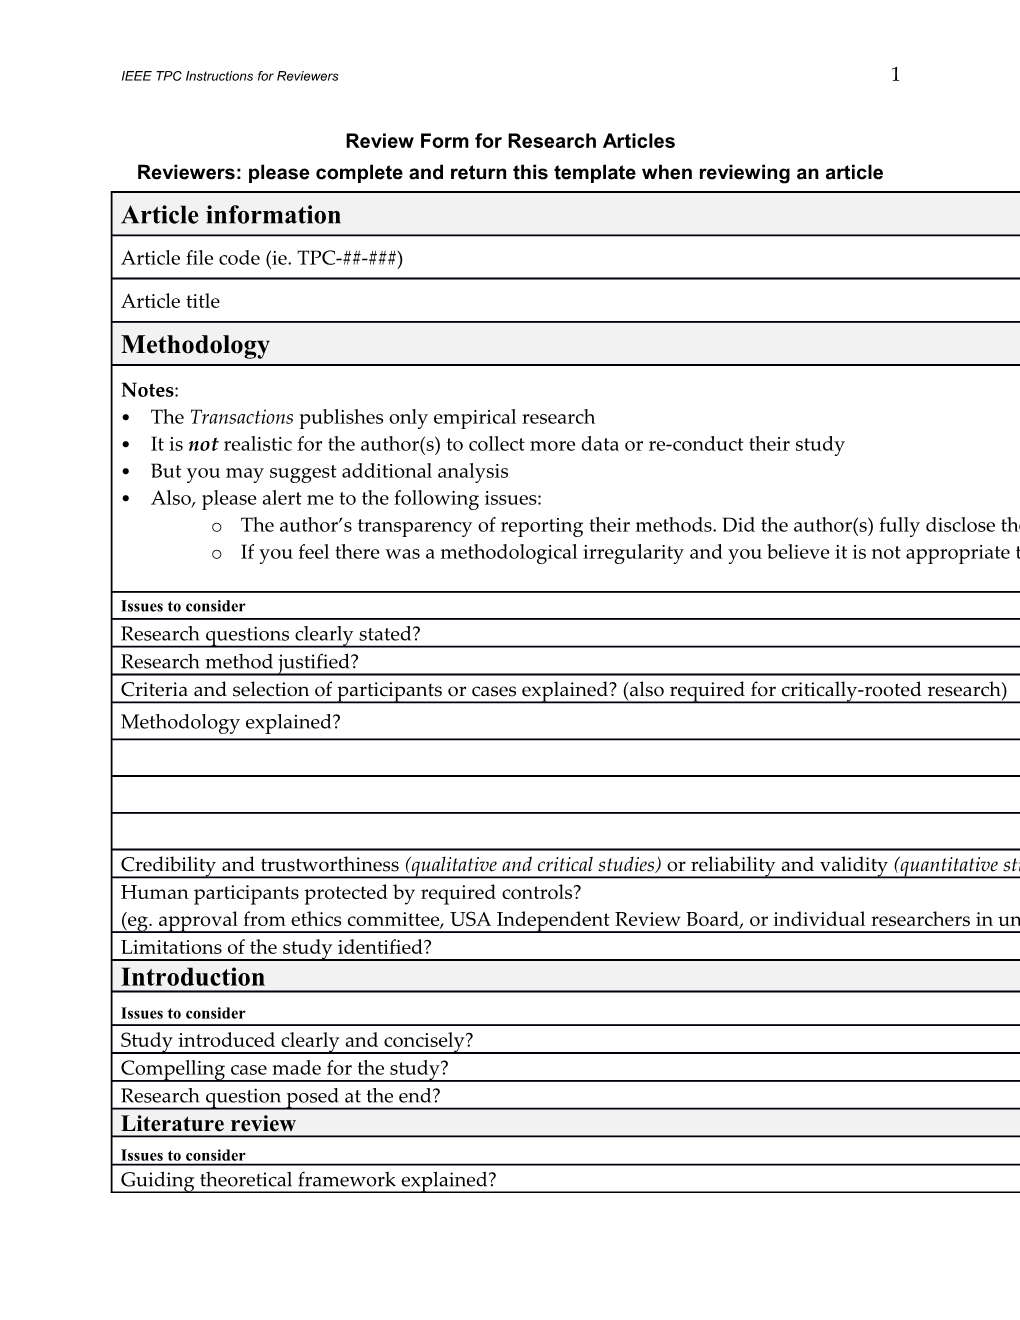 Review Form for Research Articles